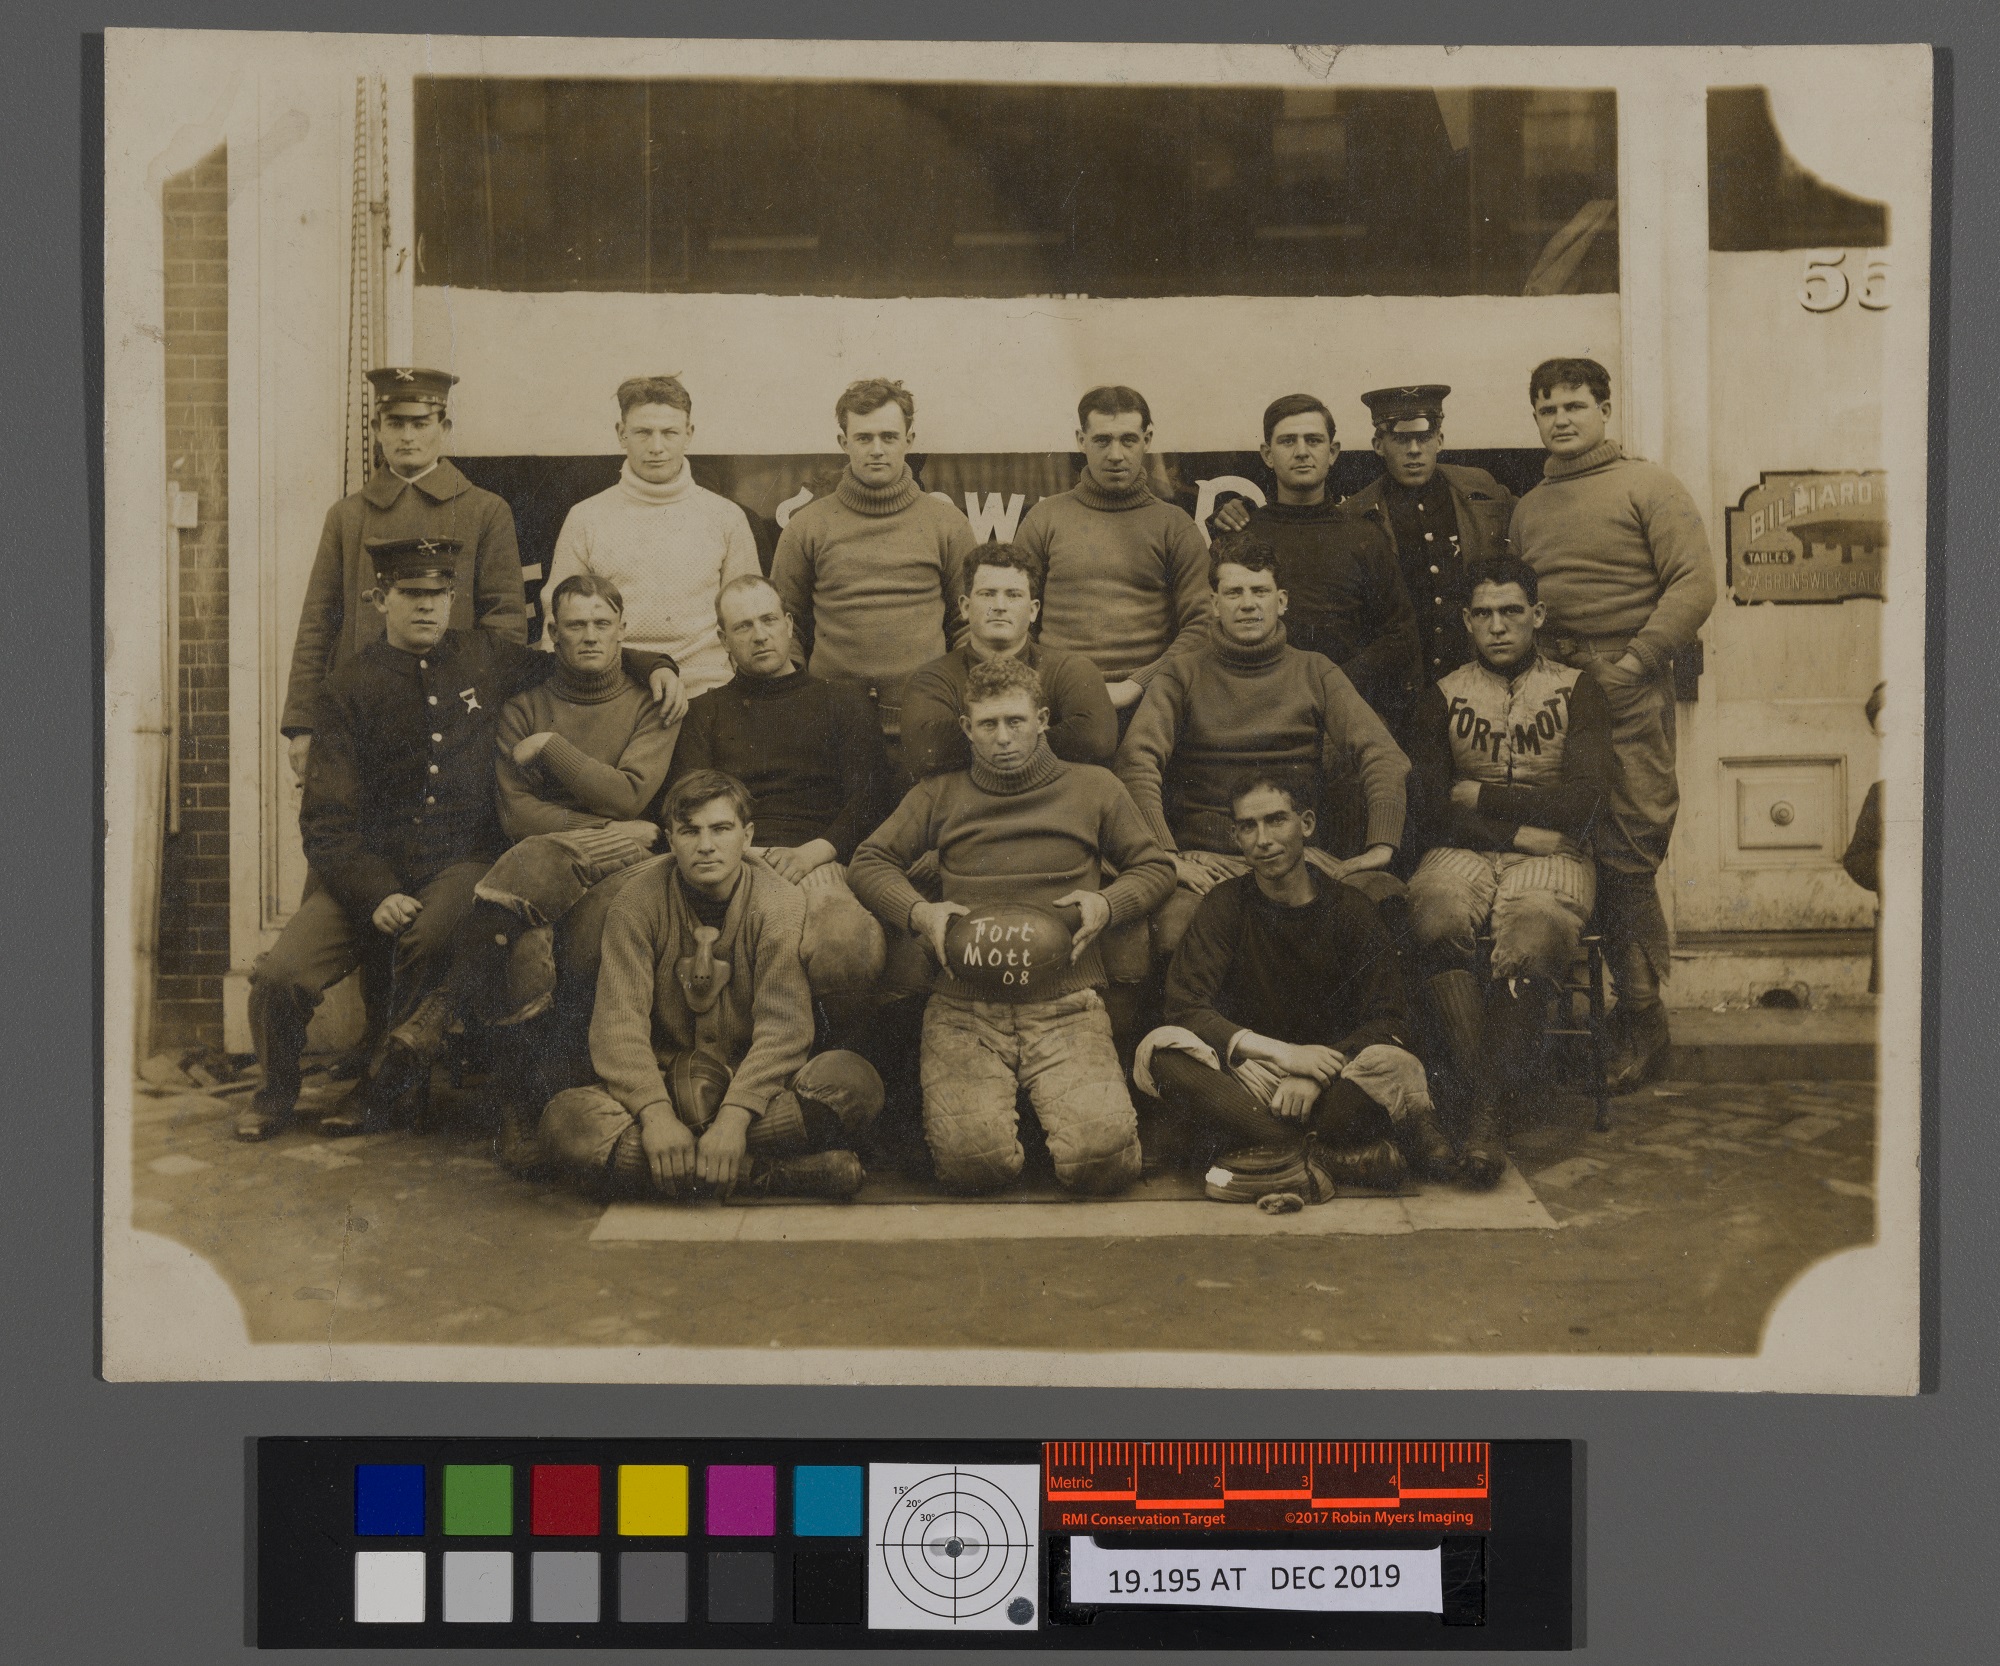 After-treatment reference photograph of the 1908 Fort Mott football team